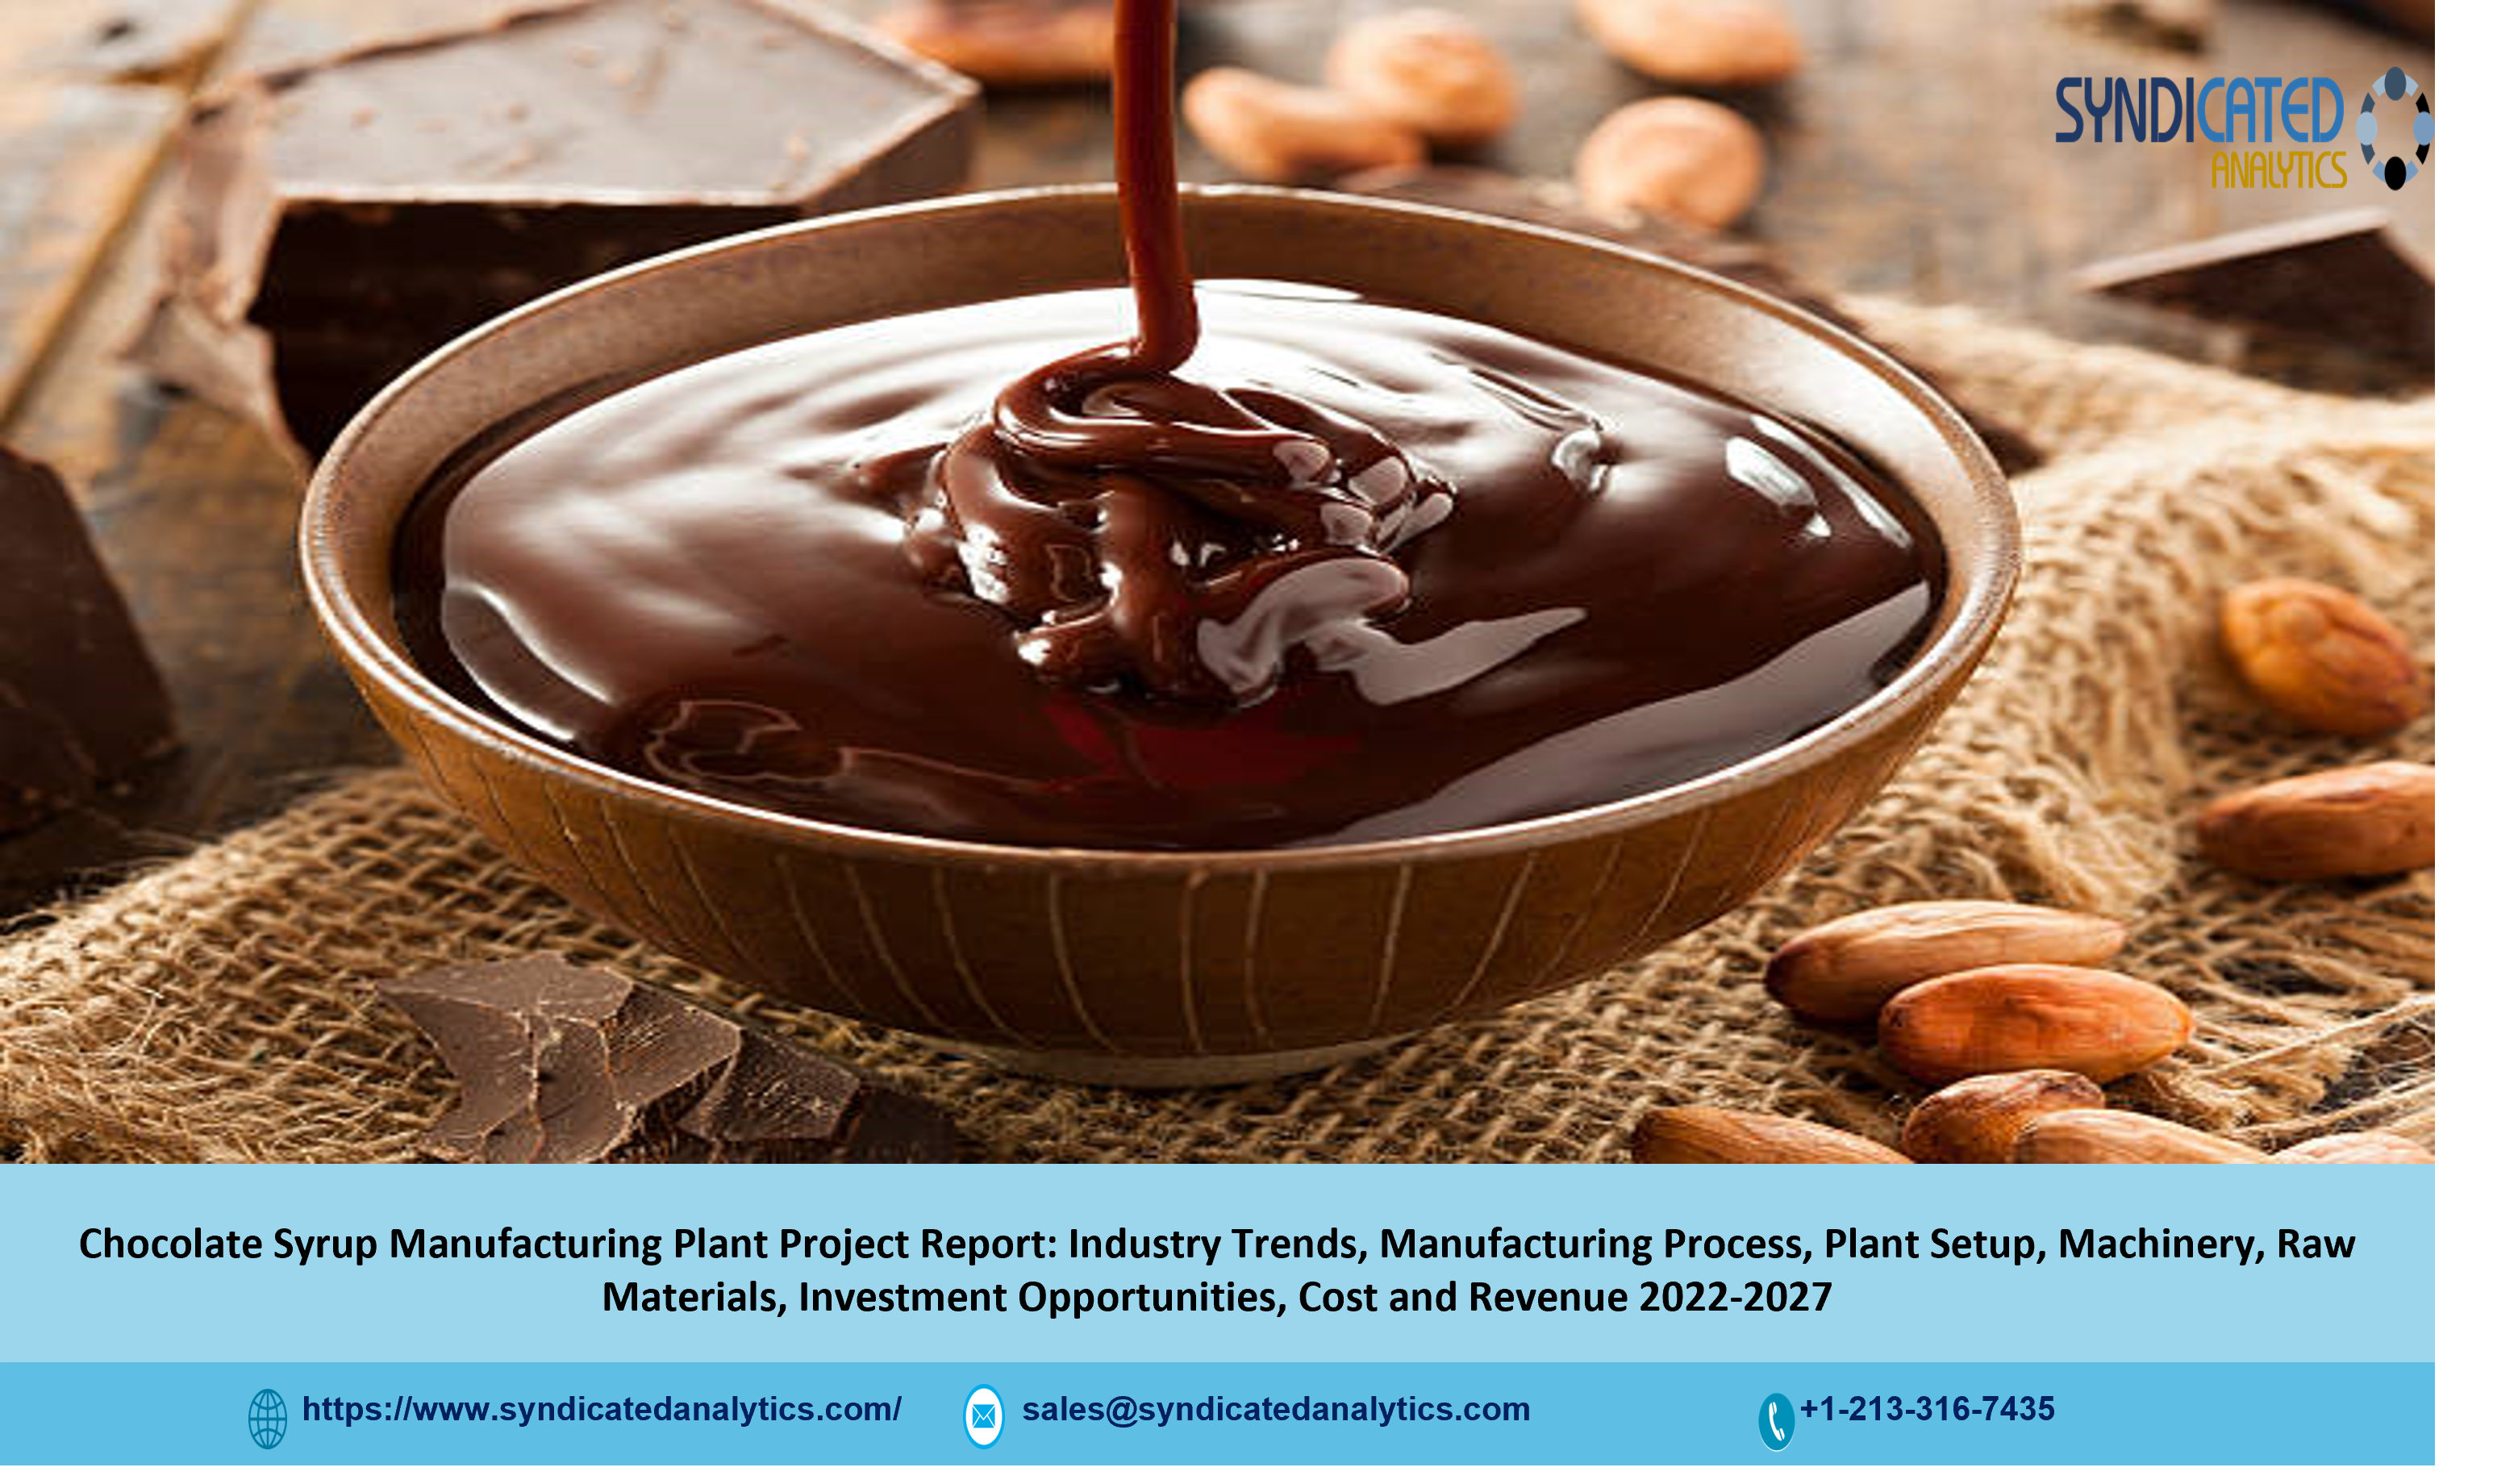 Chocolate Syrup Manufacturing Project Report